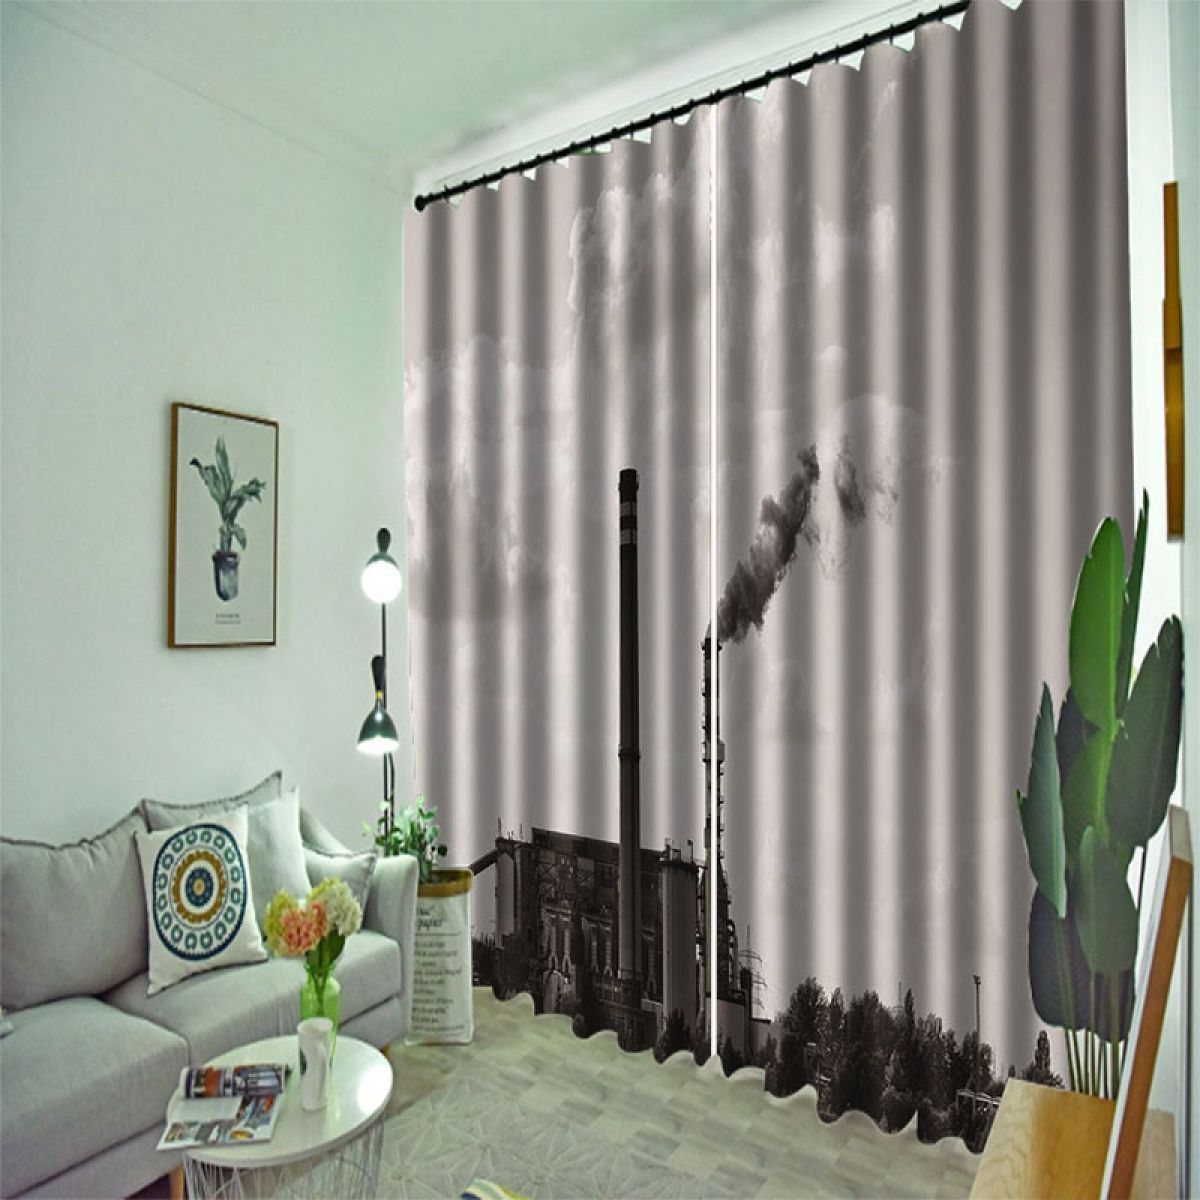 3d Factory Chimney Printed Window Curtain Home Decor